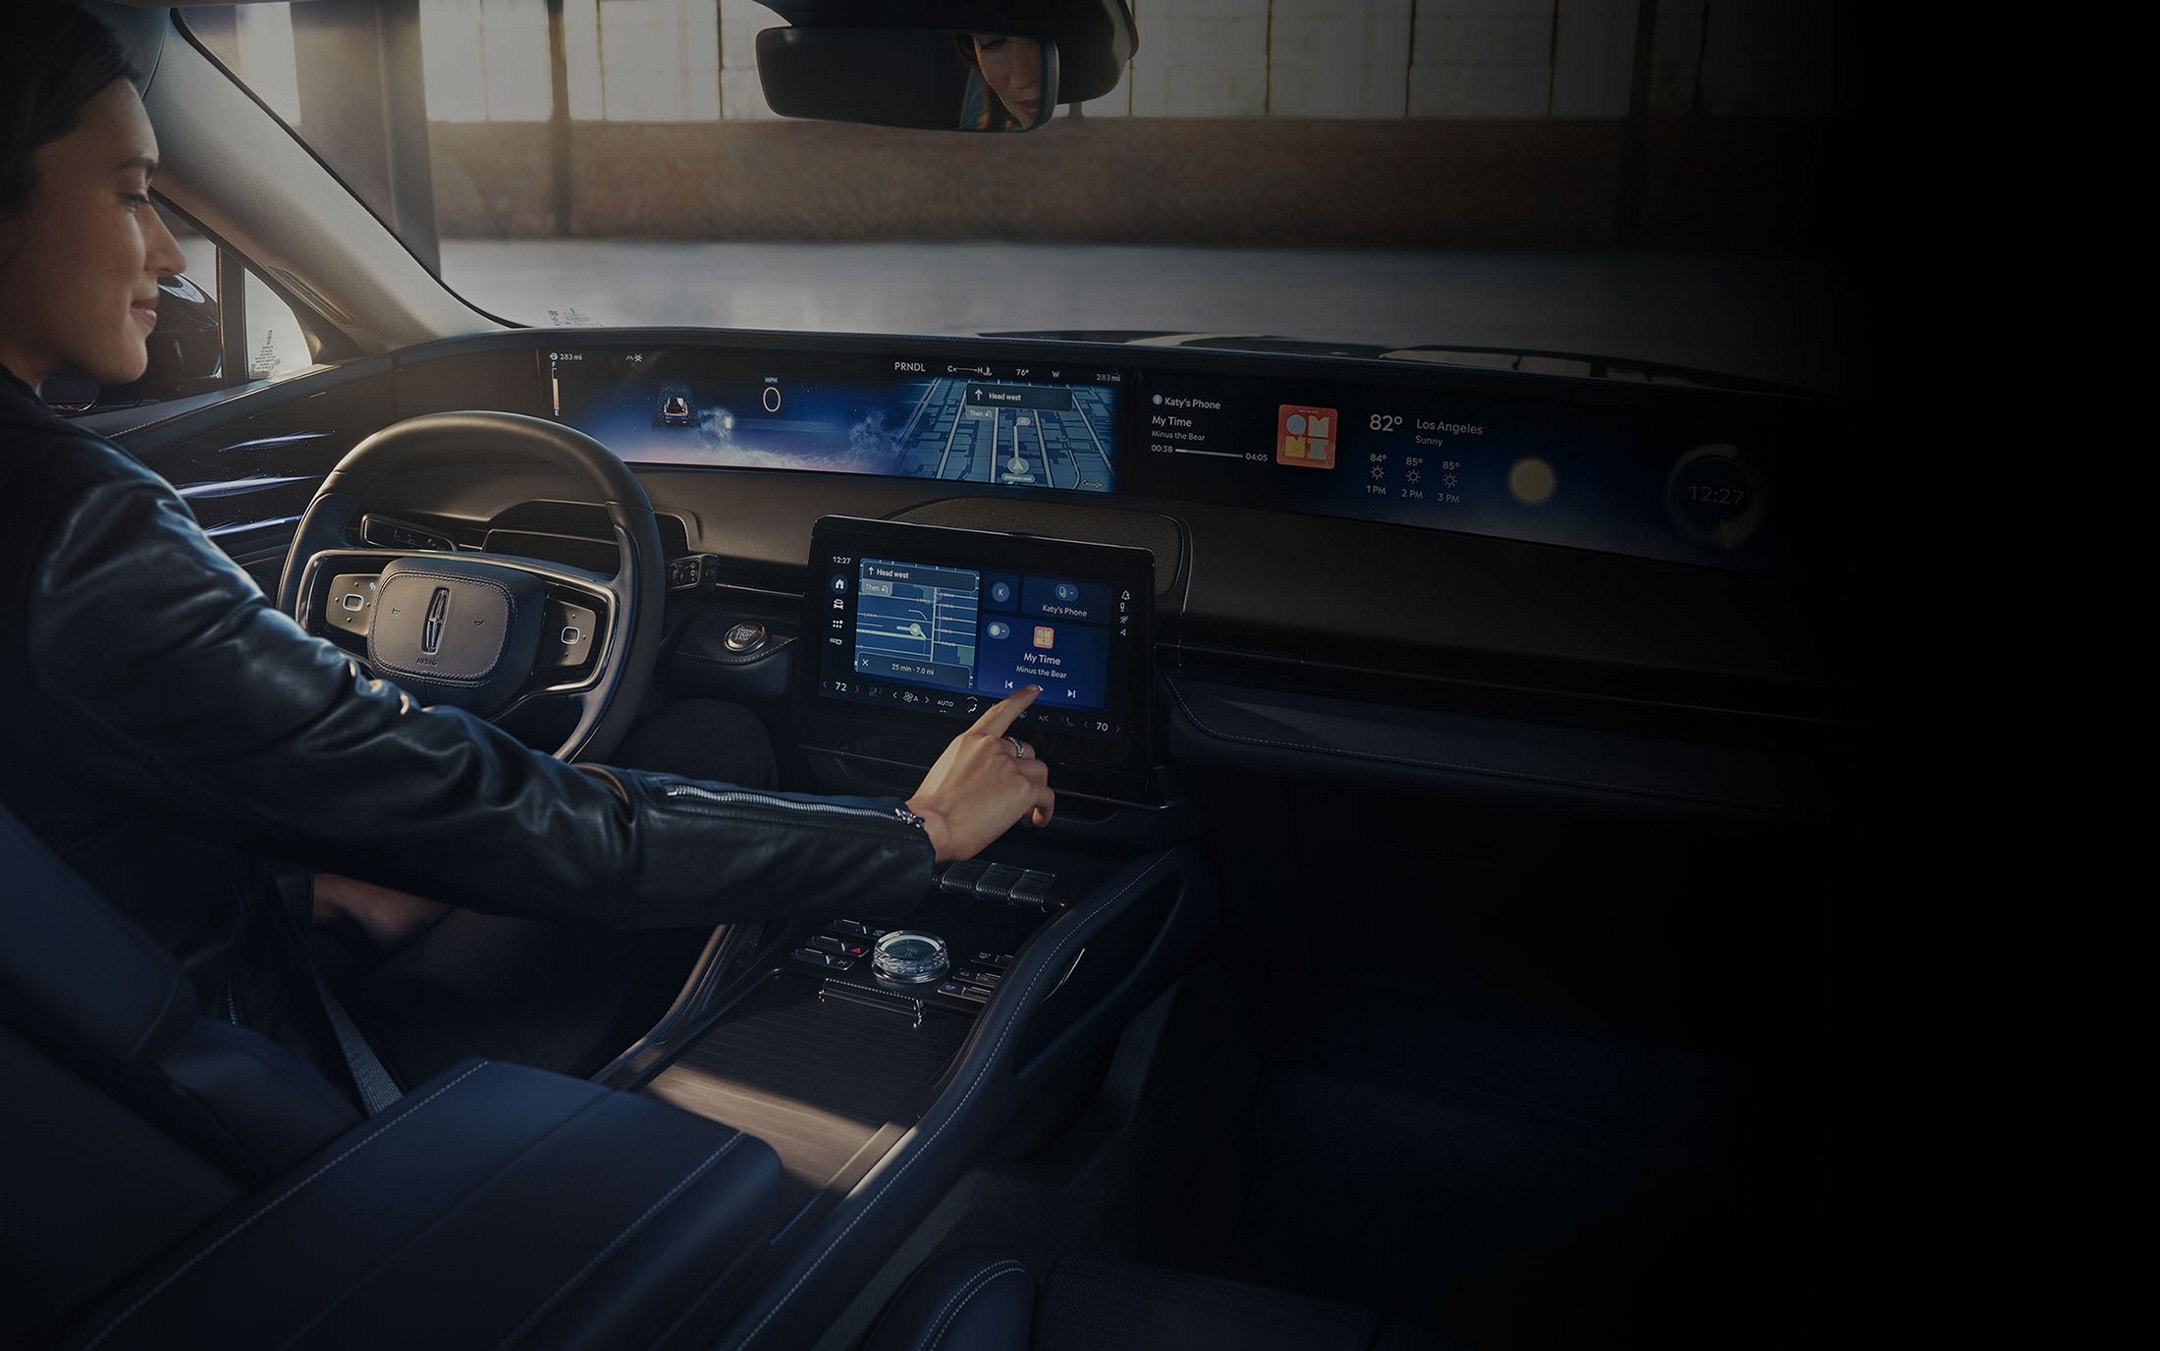 The driver of a 2025 Lincoln Nautilus® SUV interacts with the center-stack touchscreen